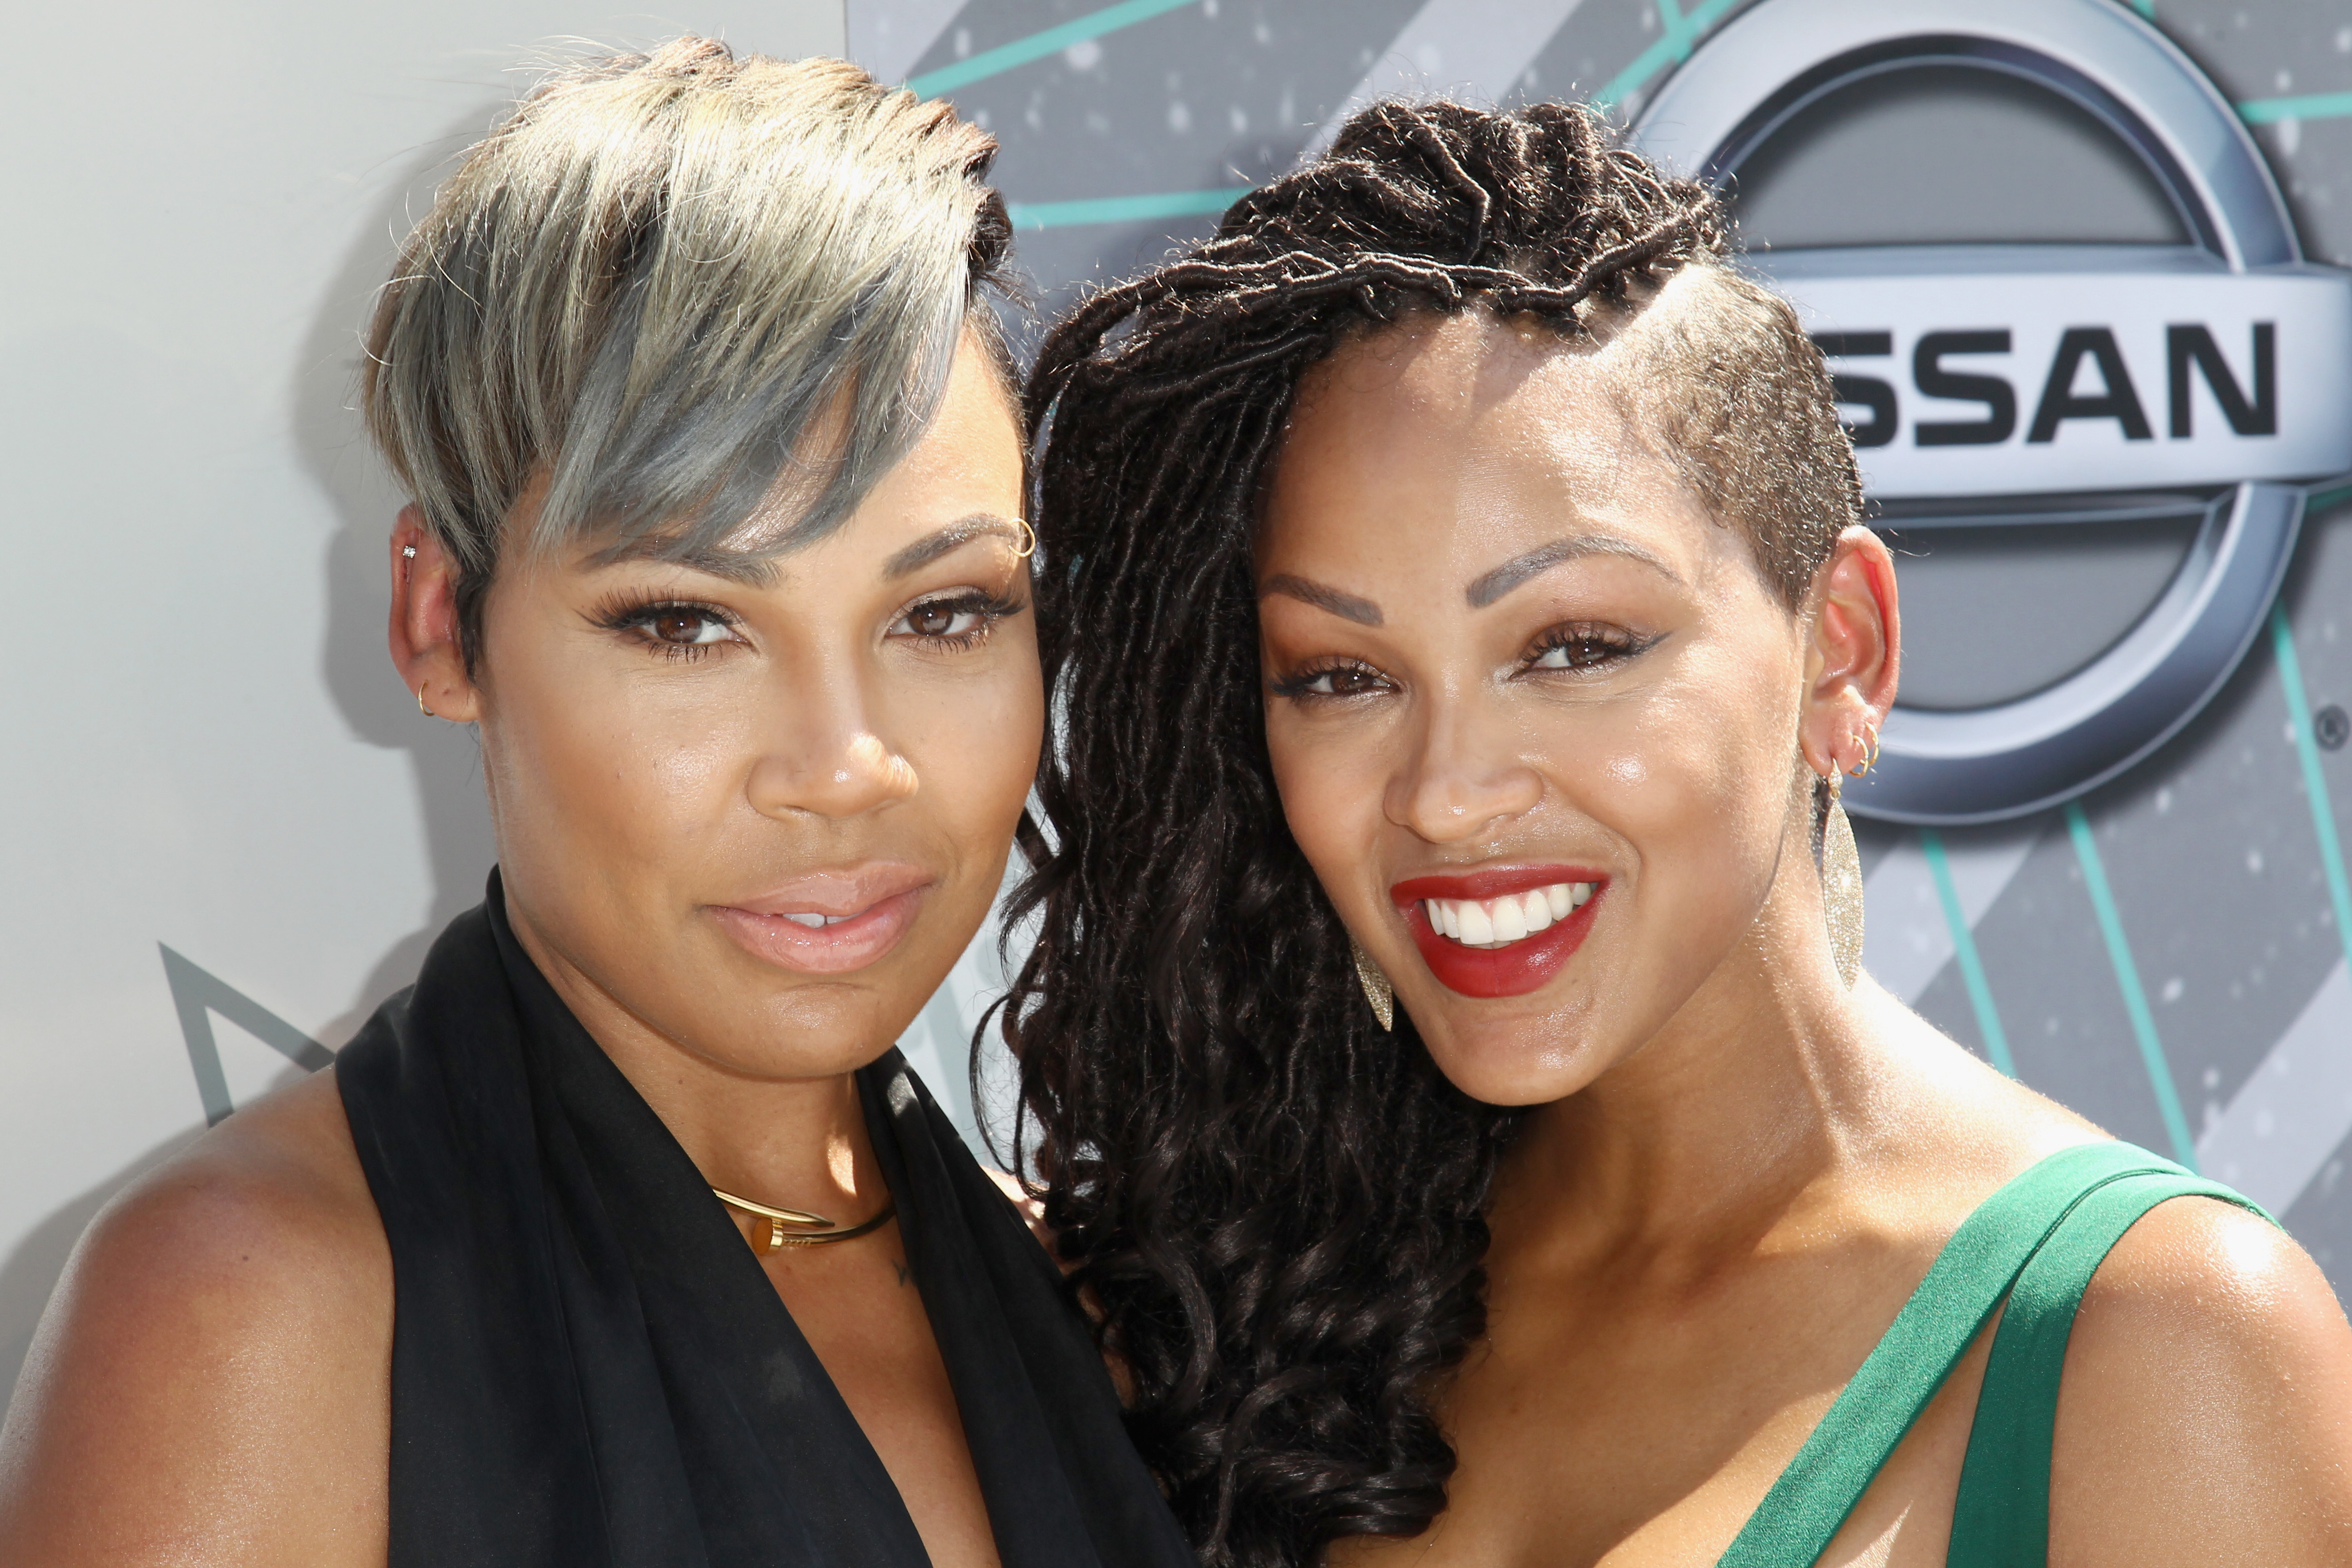 La'Myia Good and Meagan Good at the Make A Wish VIP Experience at the 2016 BET Awards on, June 26, 2016, in Los Angeles, California. | Source: Getty Images